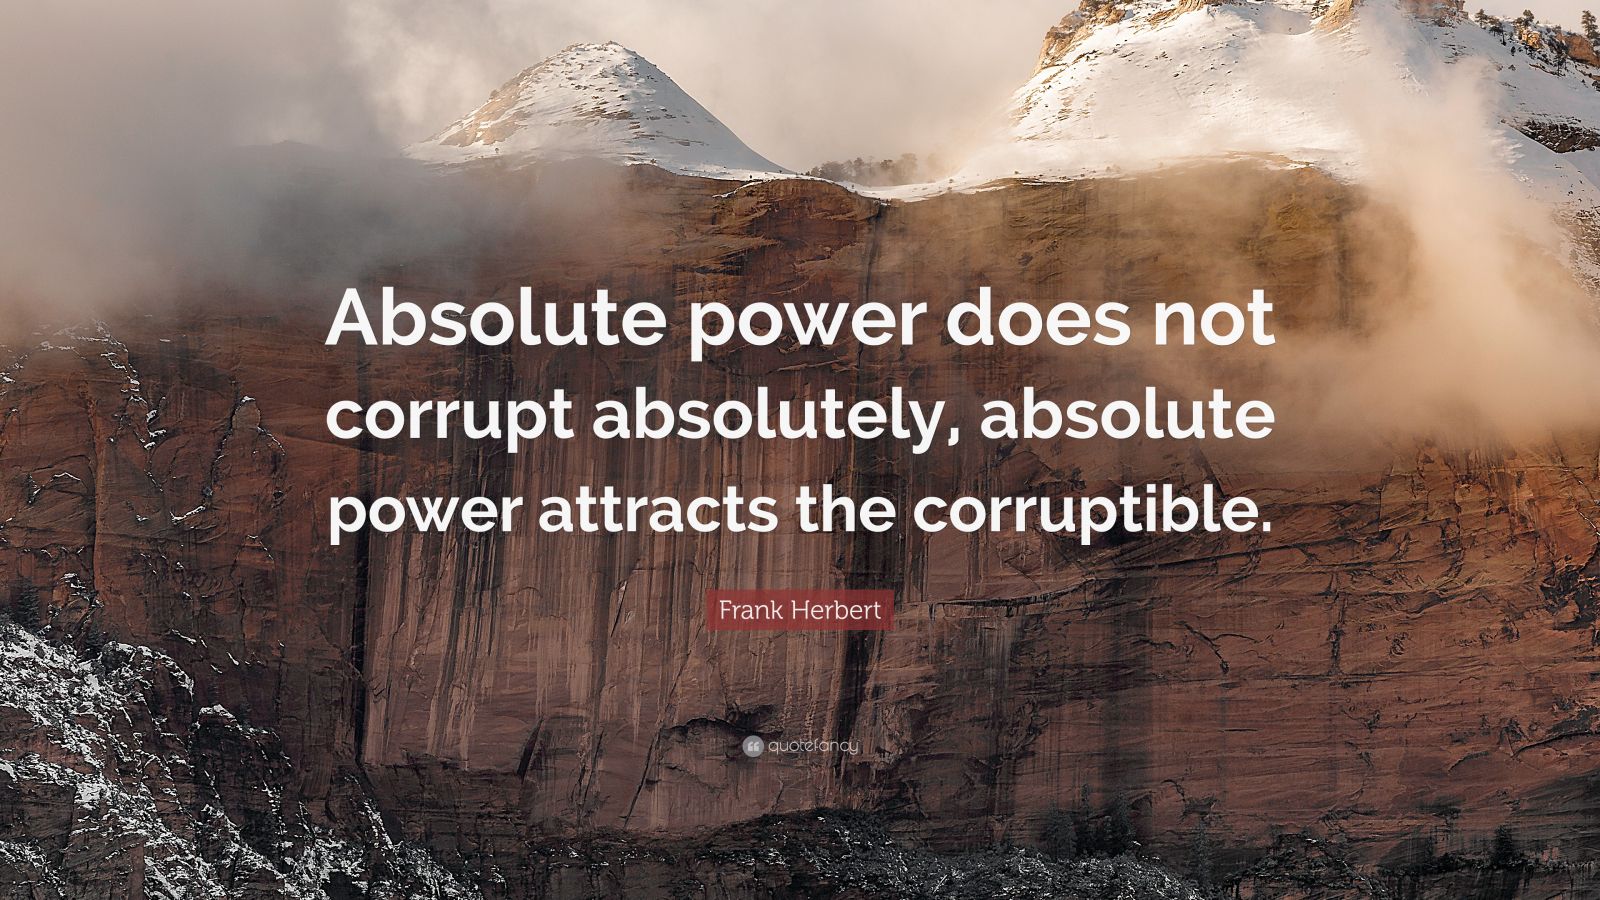 Power attracts the corruptible